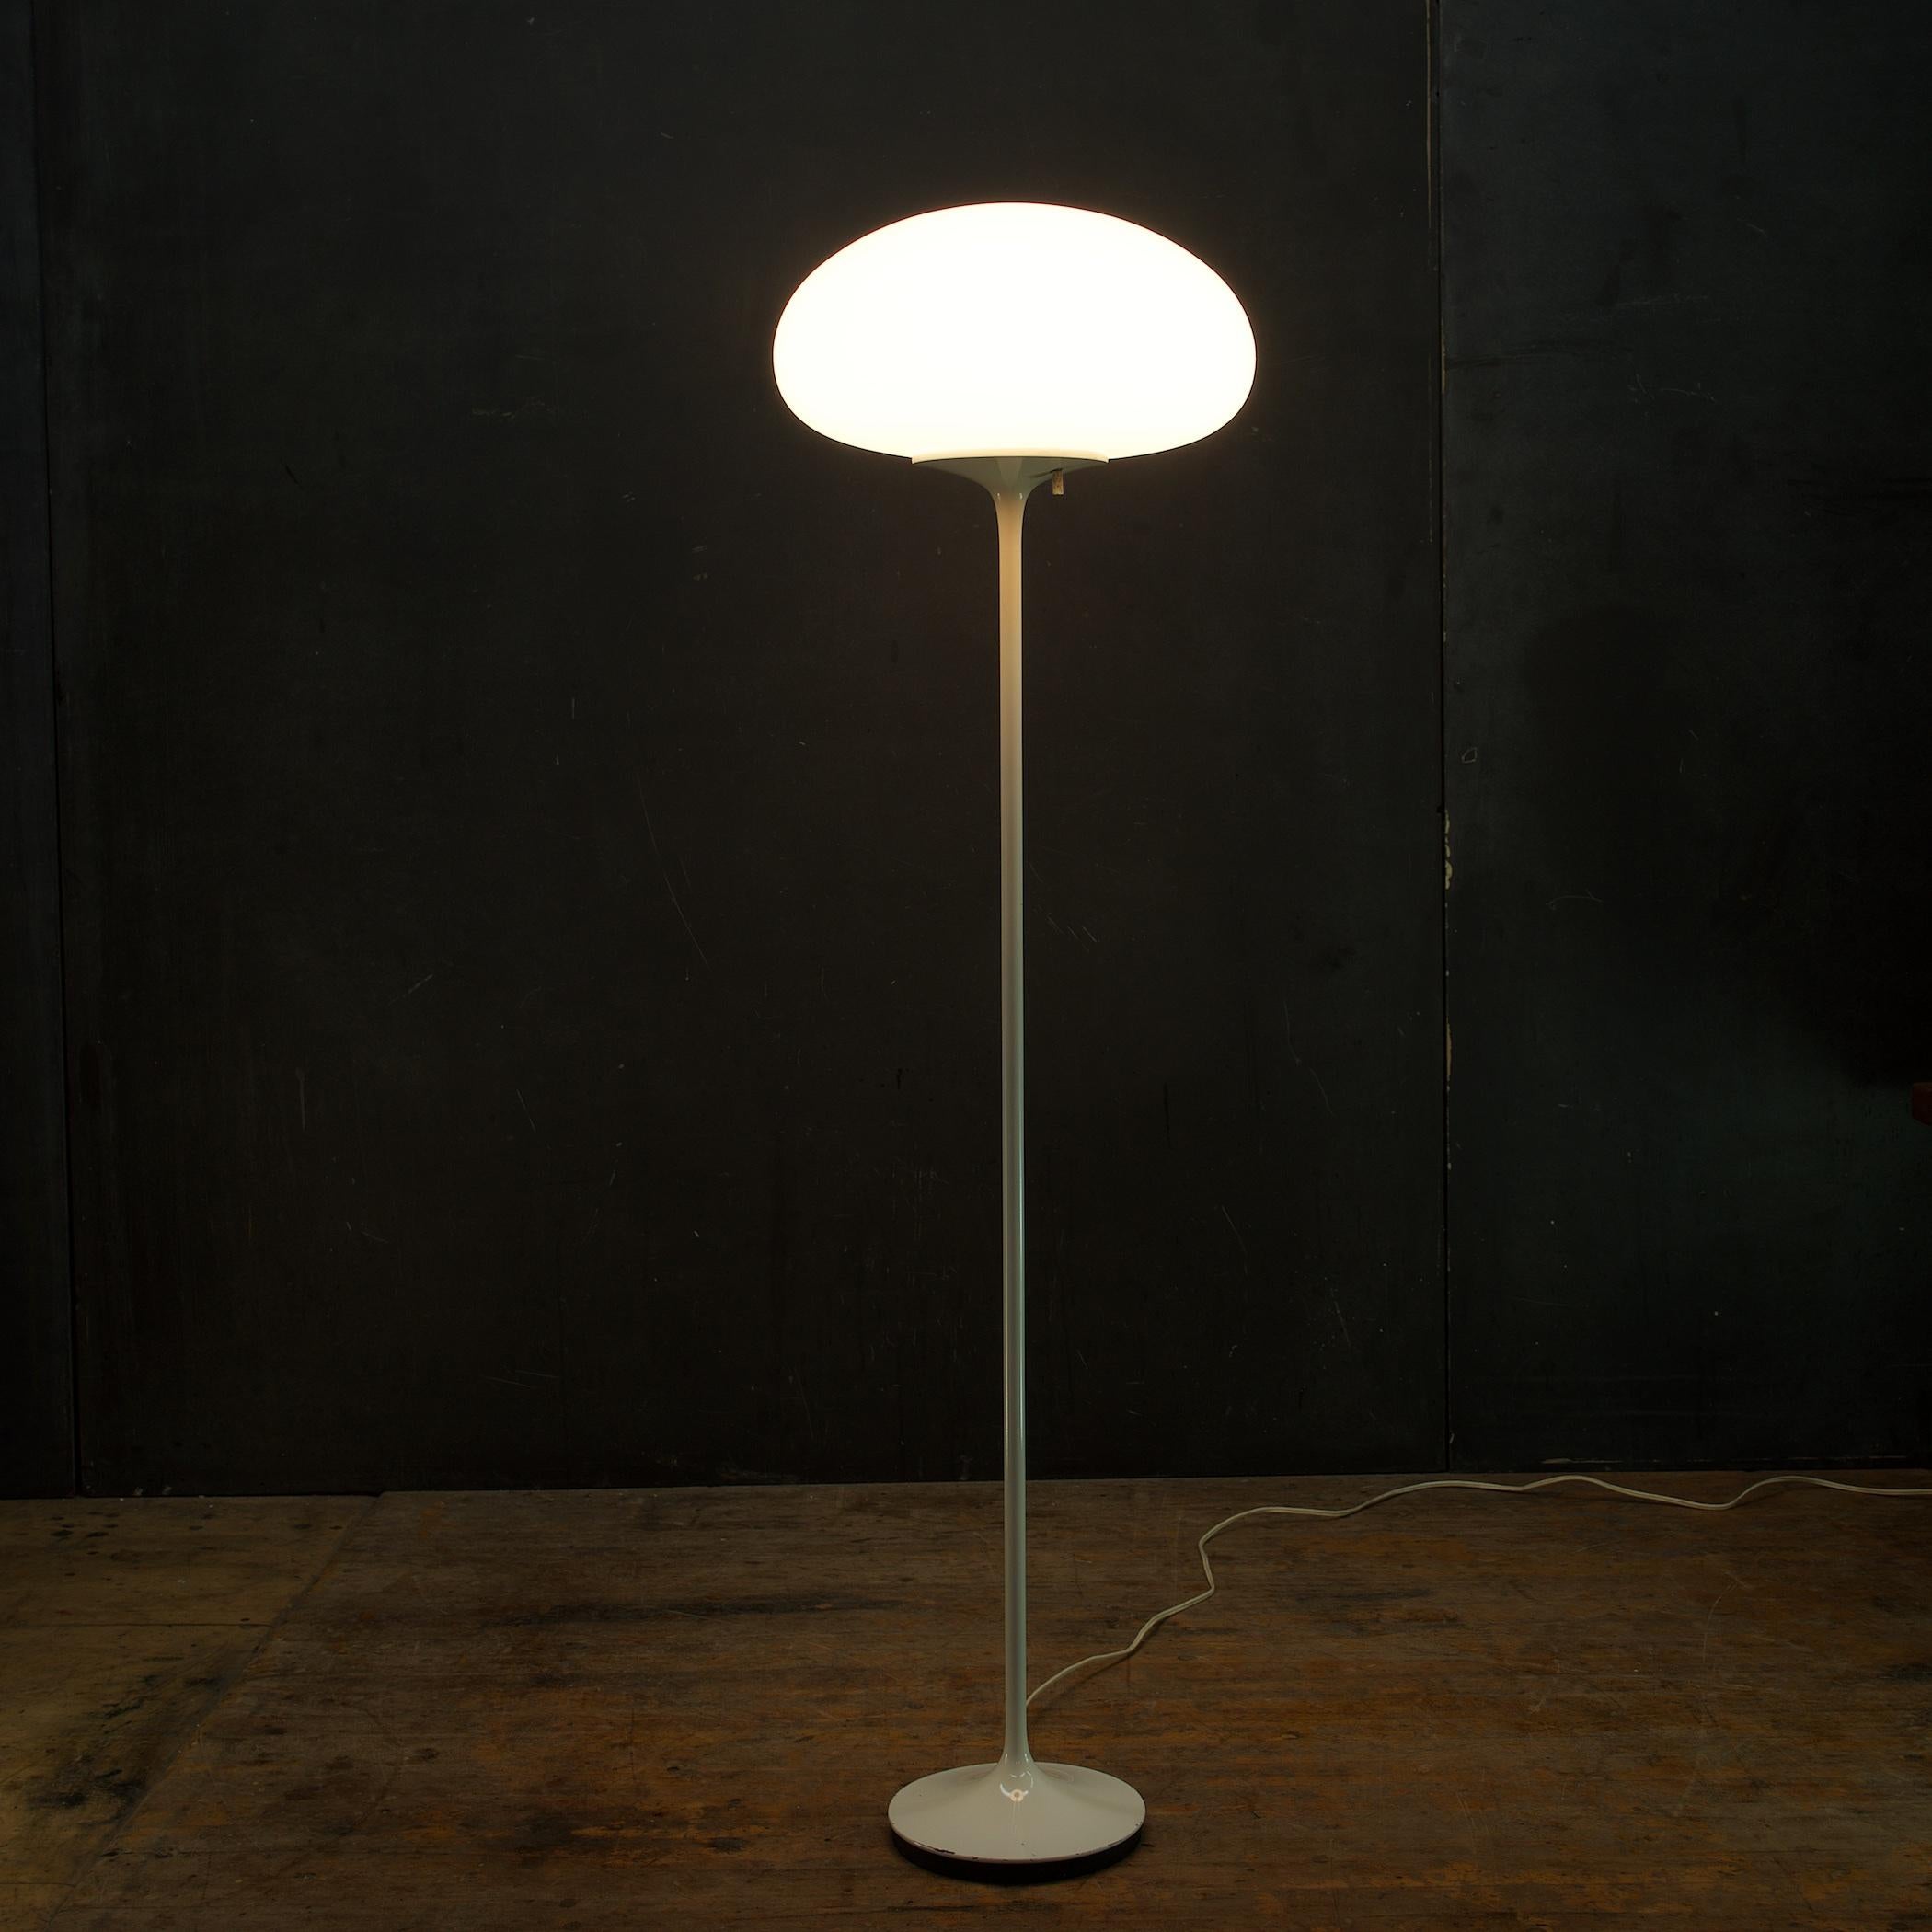 In 1962, Bill Curry and his wife Jackie founded the El Segundo California based company Design Line Incorporated, for which Bill created innovative lamps and furnishings. Design Line's first lamp, was this one the Stemlite, which was wildly popular